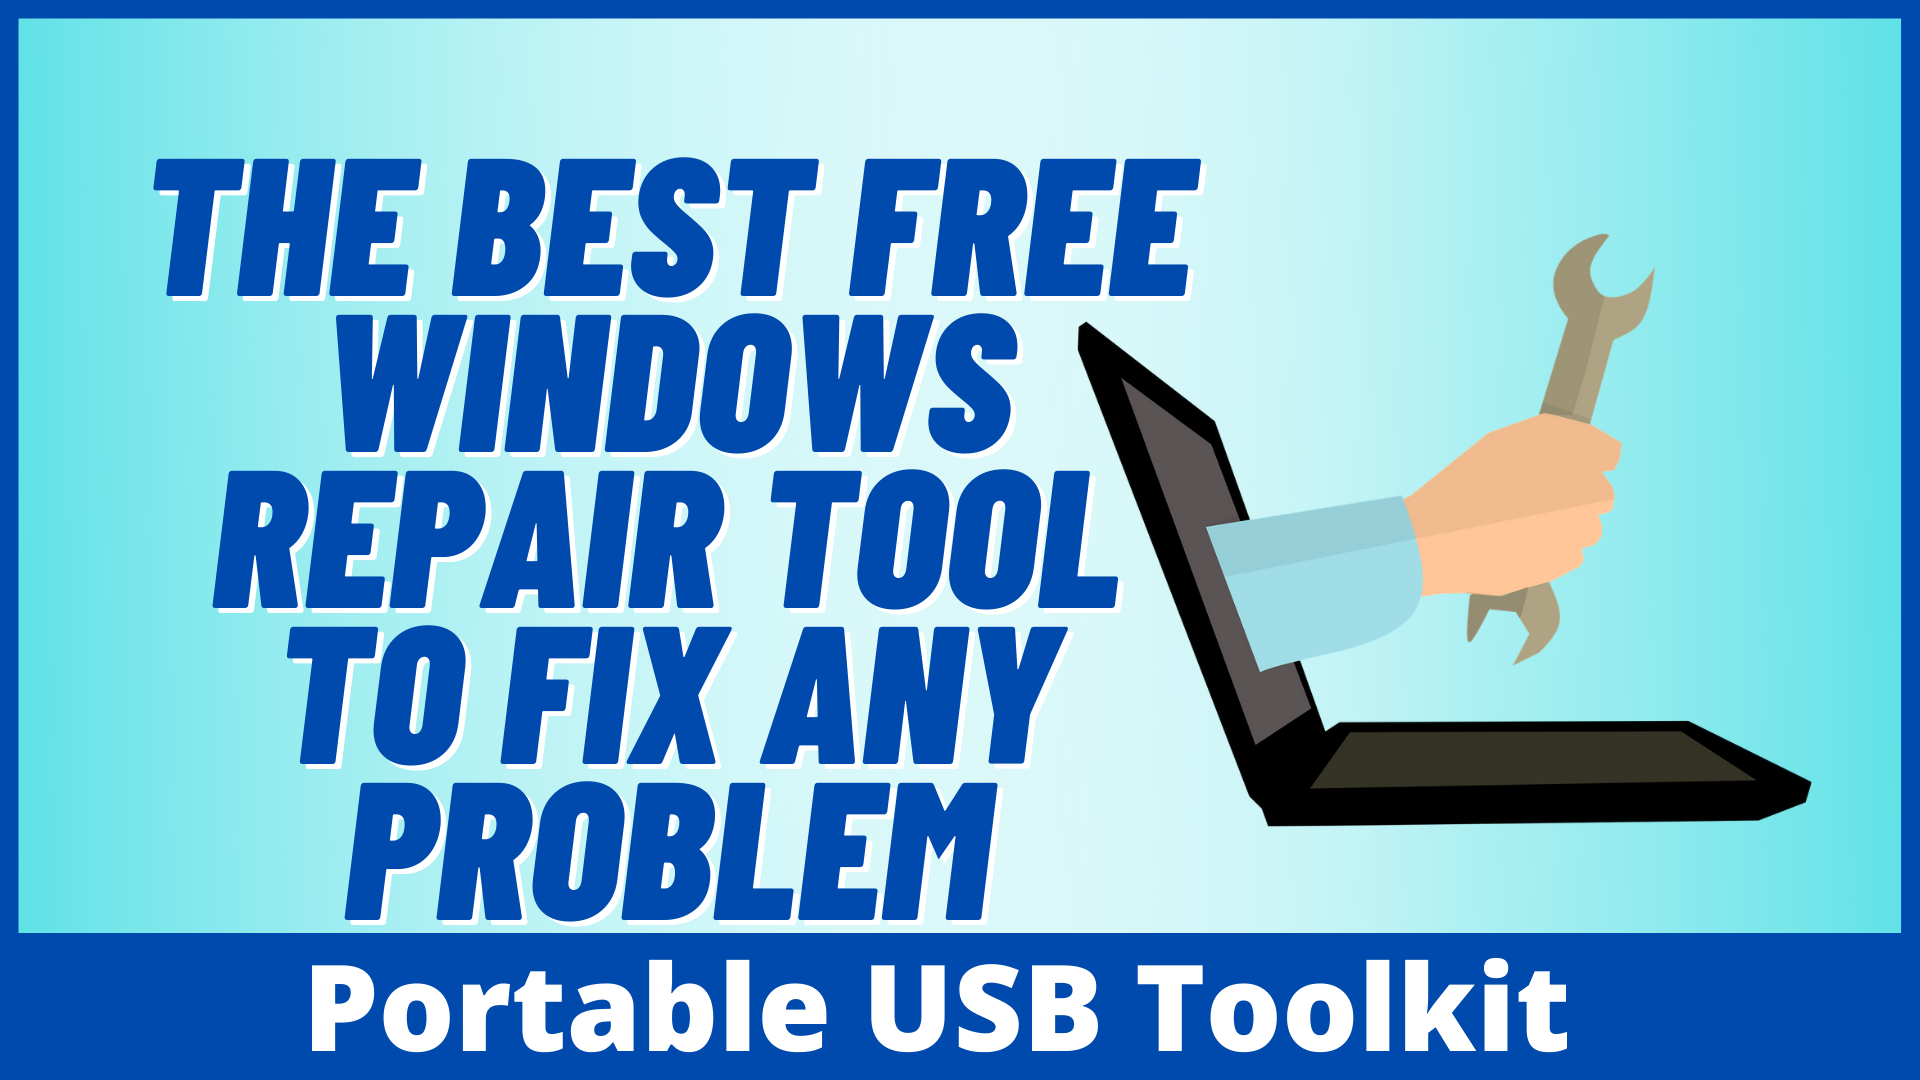 5 Best Free Maintenance Tools for Cleaning Your Windows PC - TurboFuture